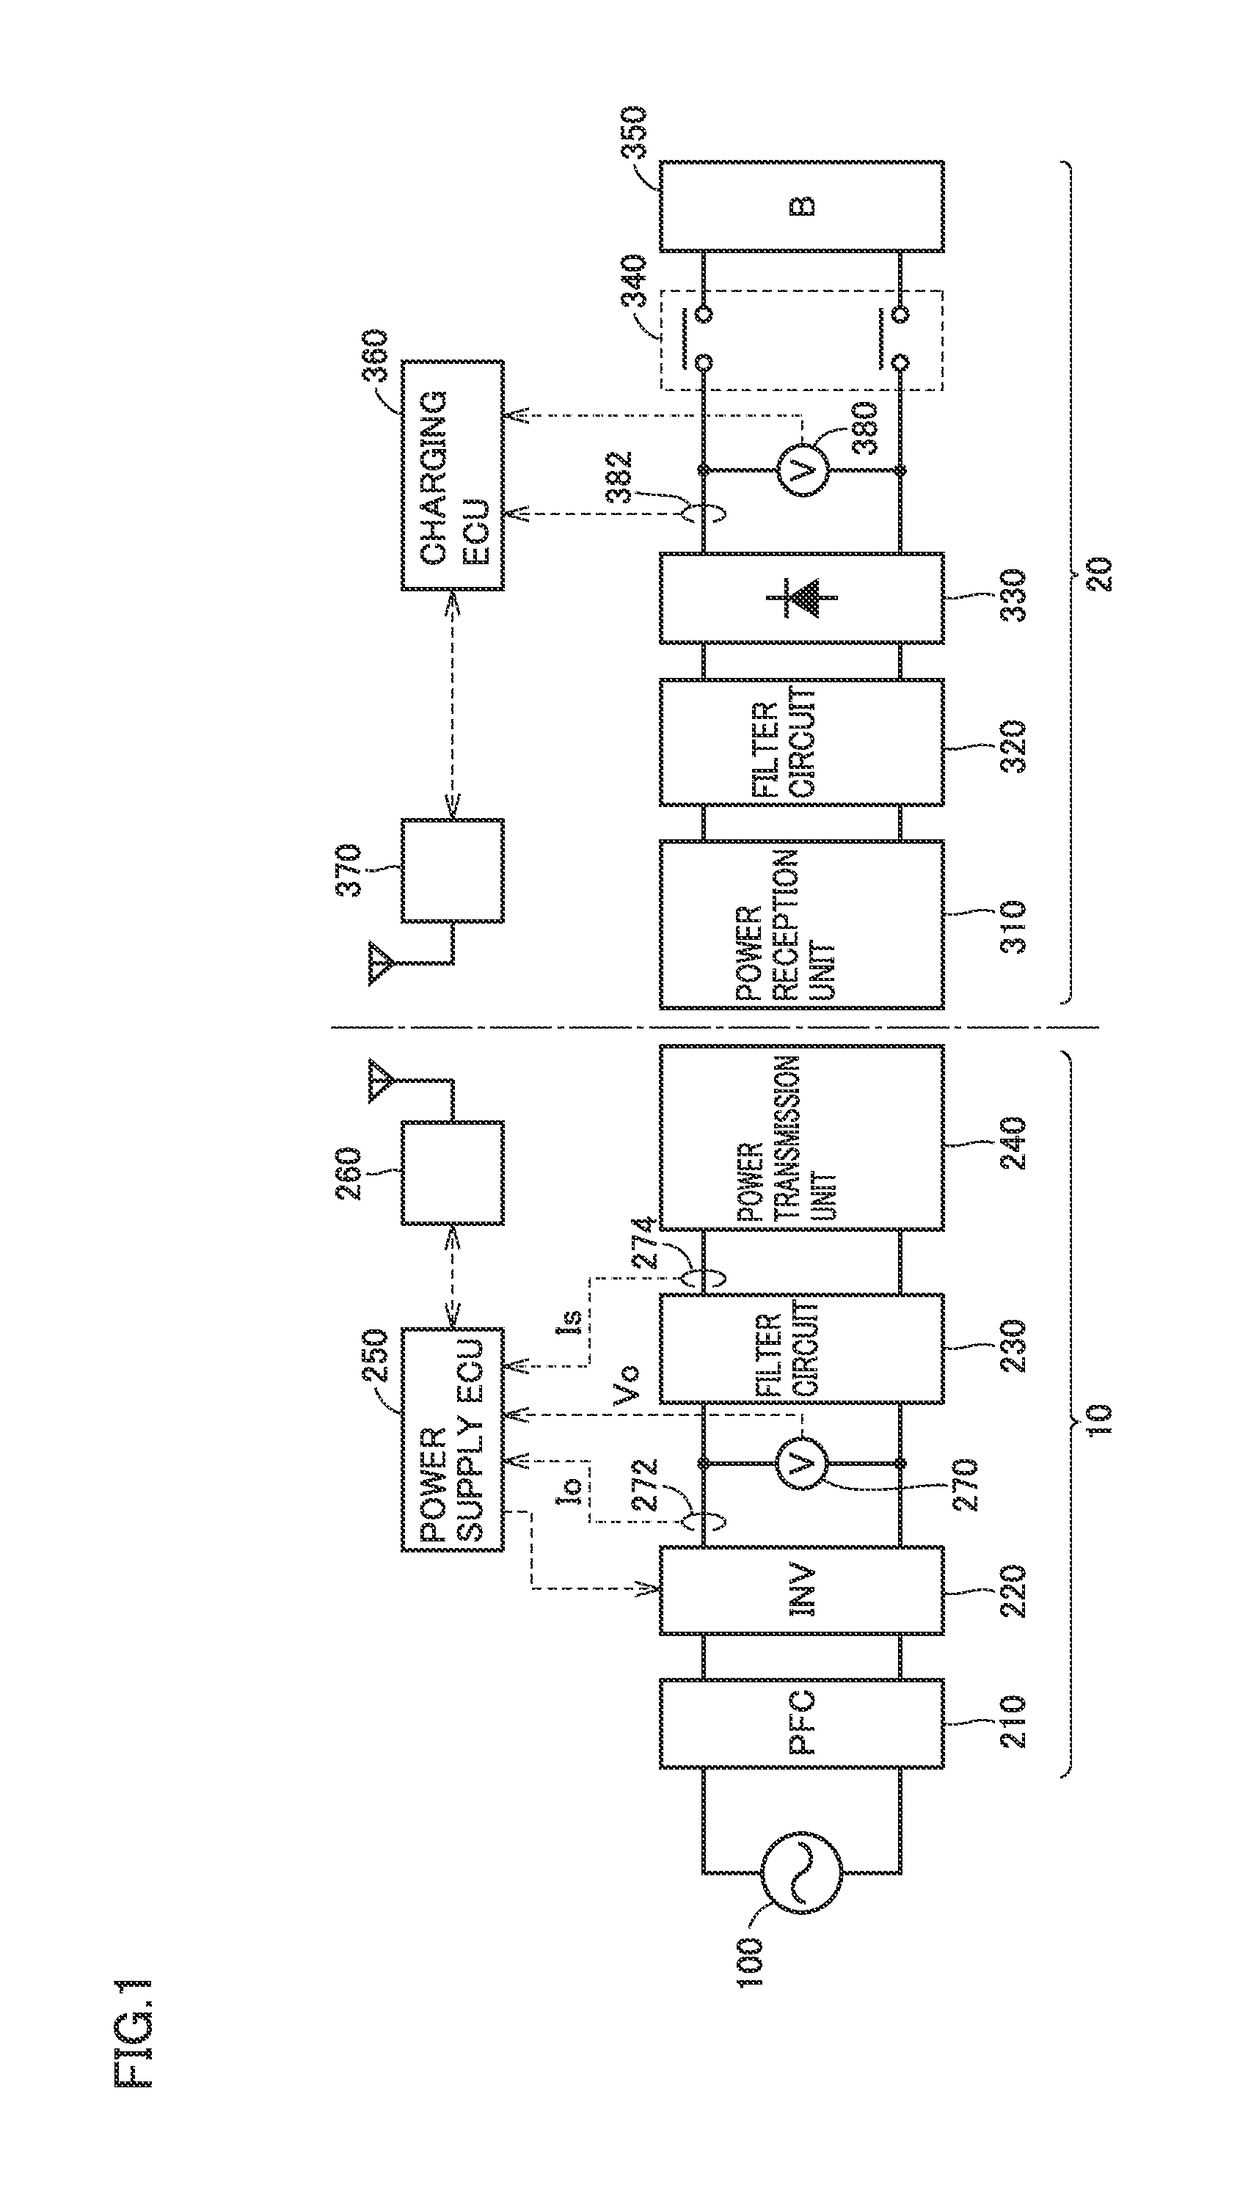 Contactless power transmission device and power transfer system